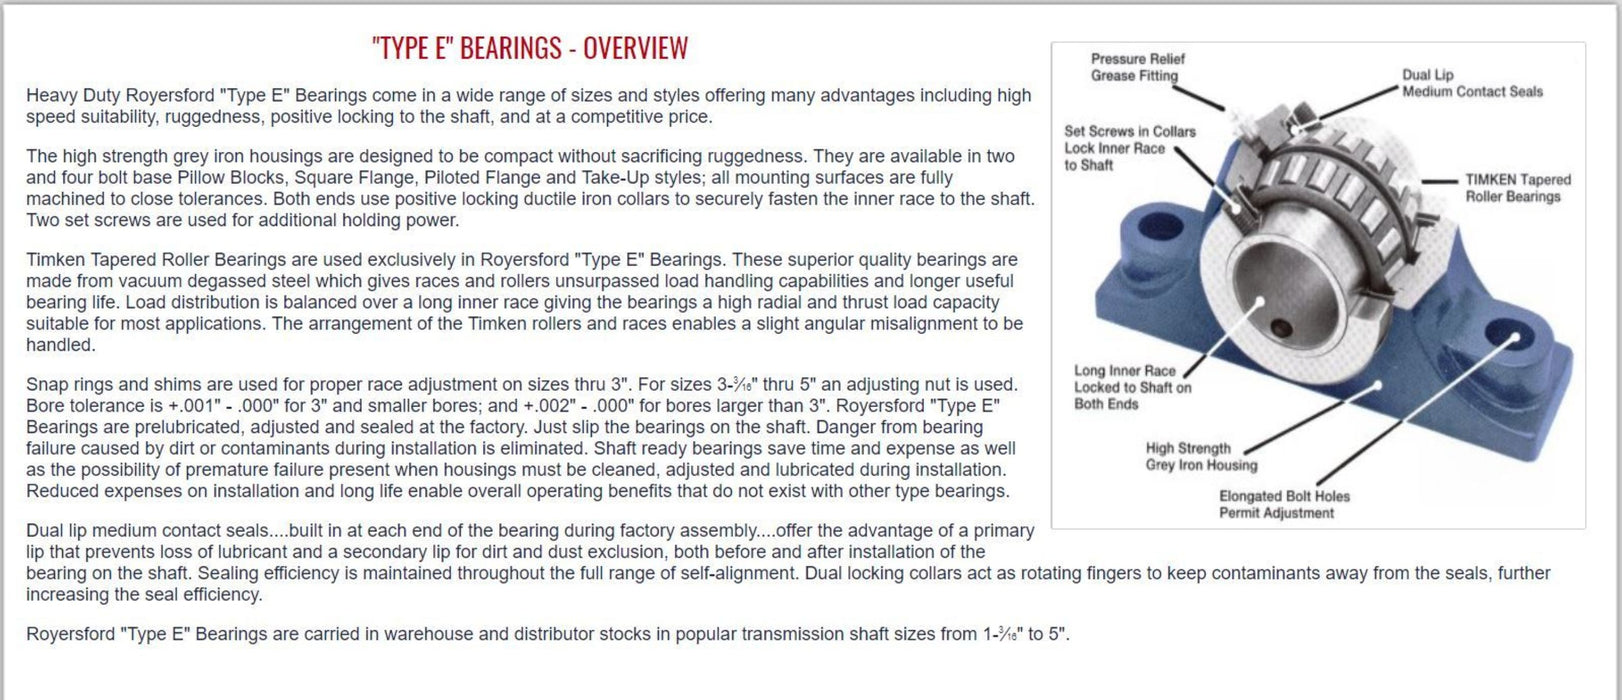 20-05-0110, Royersford Type E 4 Bolt Square Flange Bearing, 1-5/8" with Timken Tapered Roller Bearings